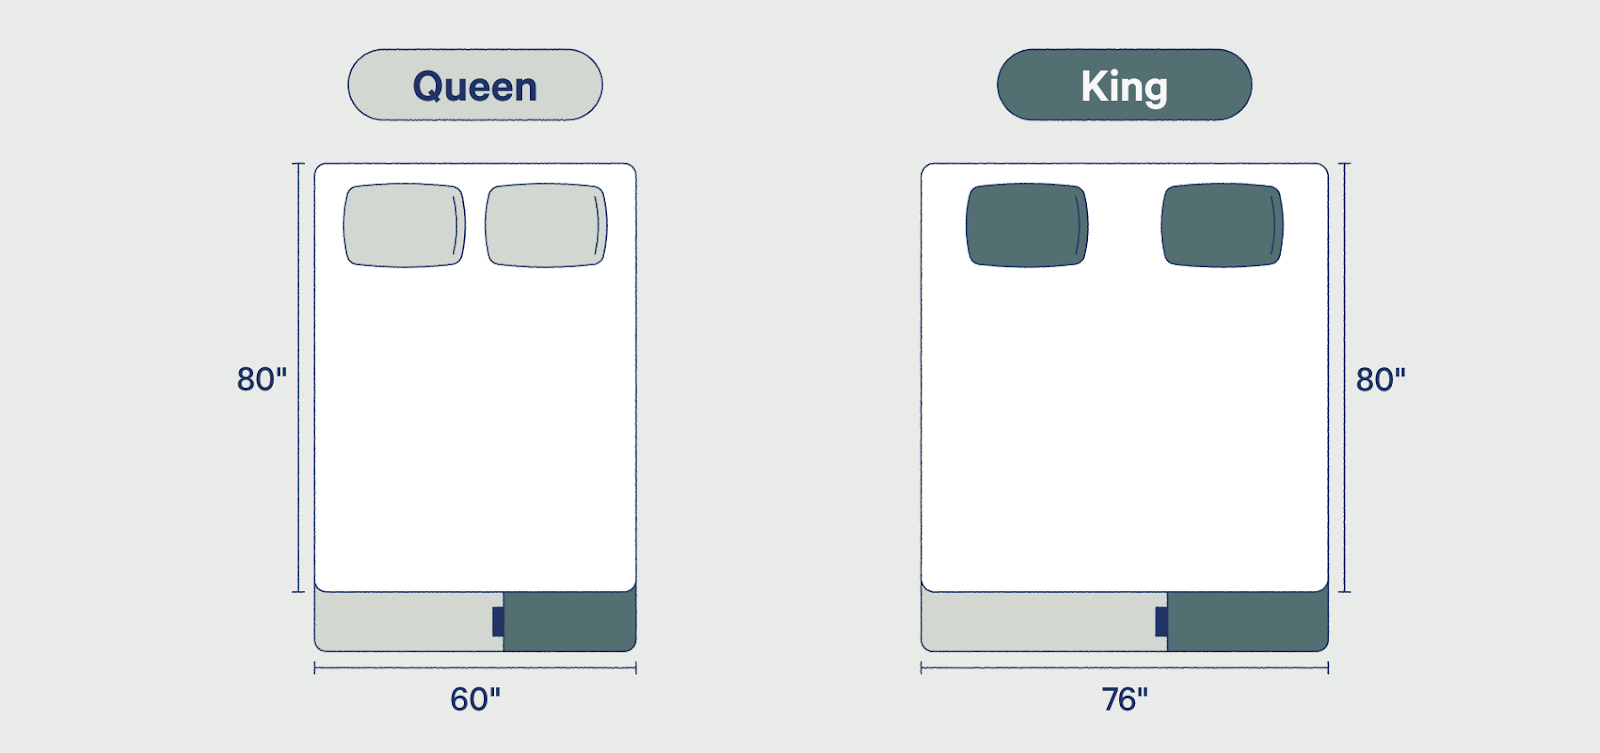 King Vs Queen Bed Size And Comparison, King Size Bed Inches